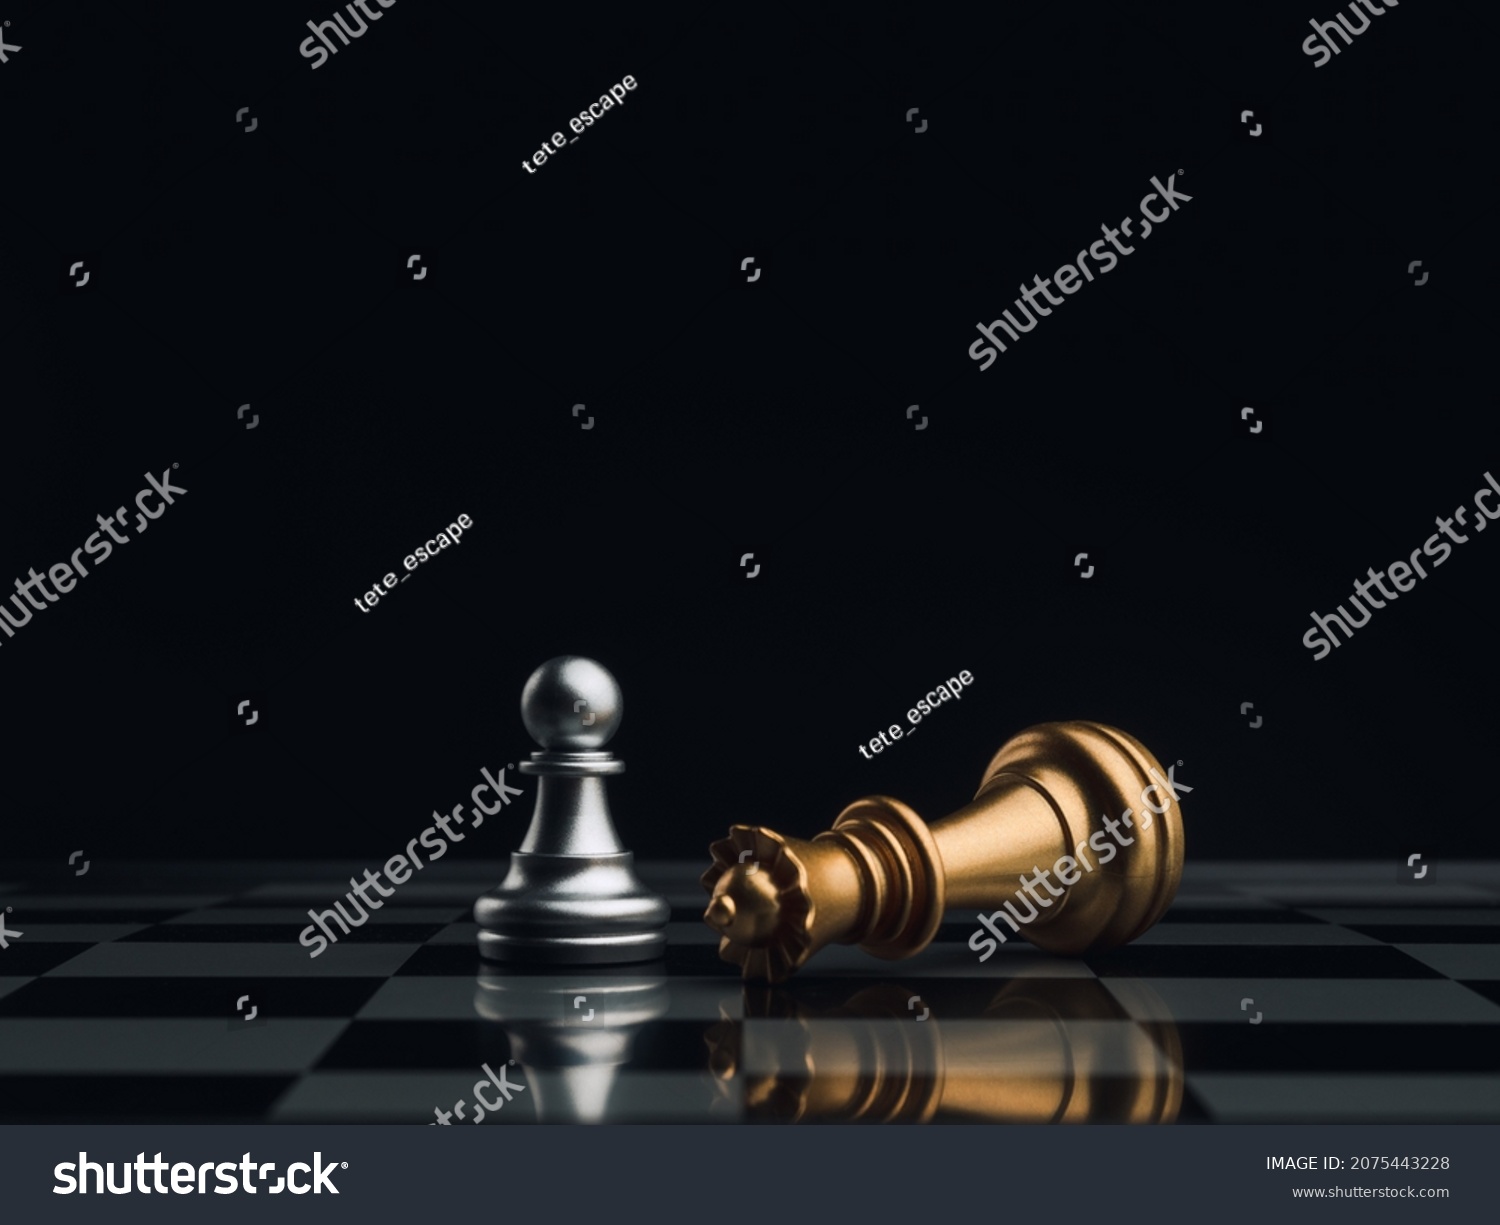 A little silver pawn chess piece standing with the win near a fallen golden queen chess piece on a chessboard on dark background. Leadership, winner, brave, competition, and business strategy concept. #2075443228